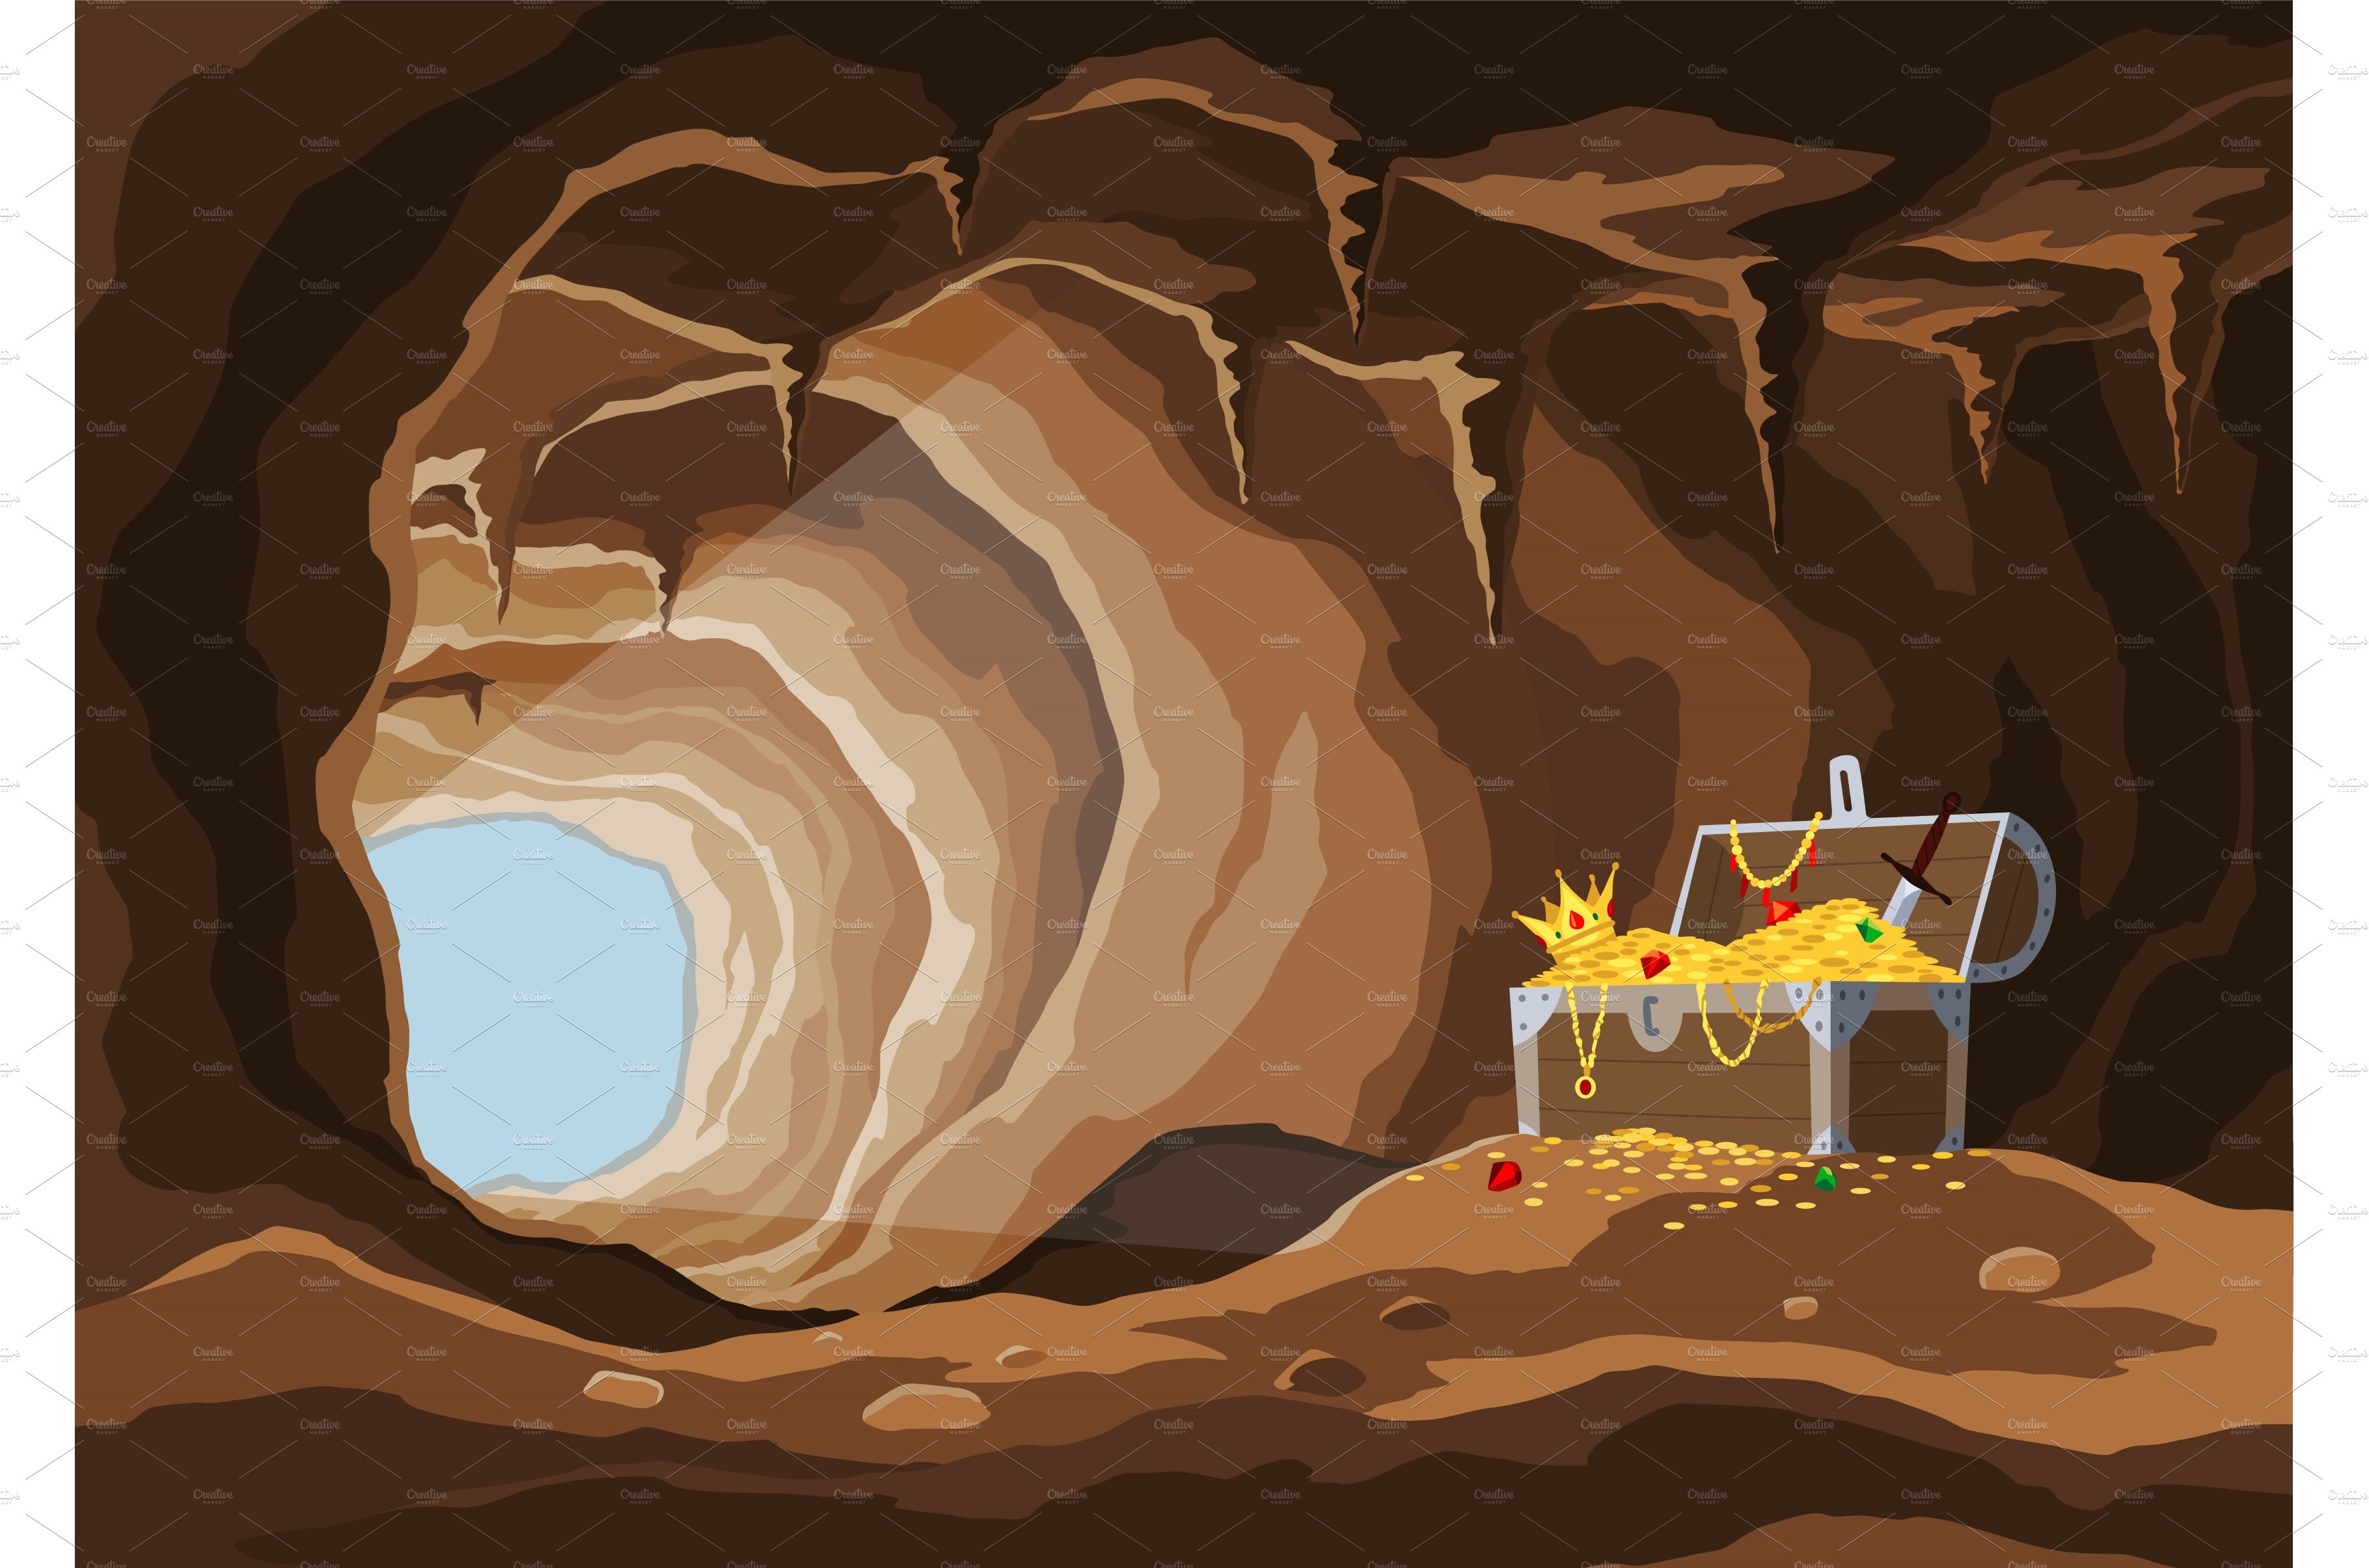 Treasure cave with crystals cover image.